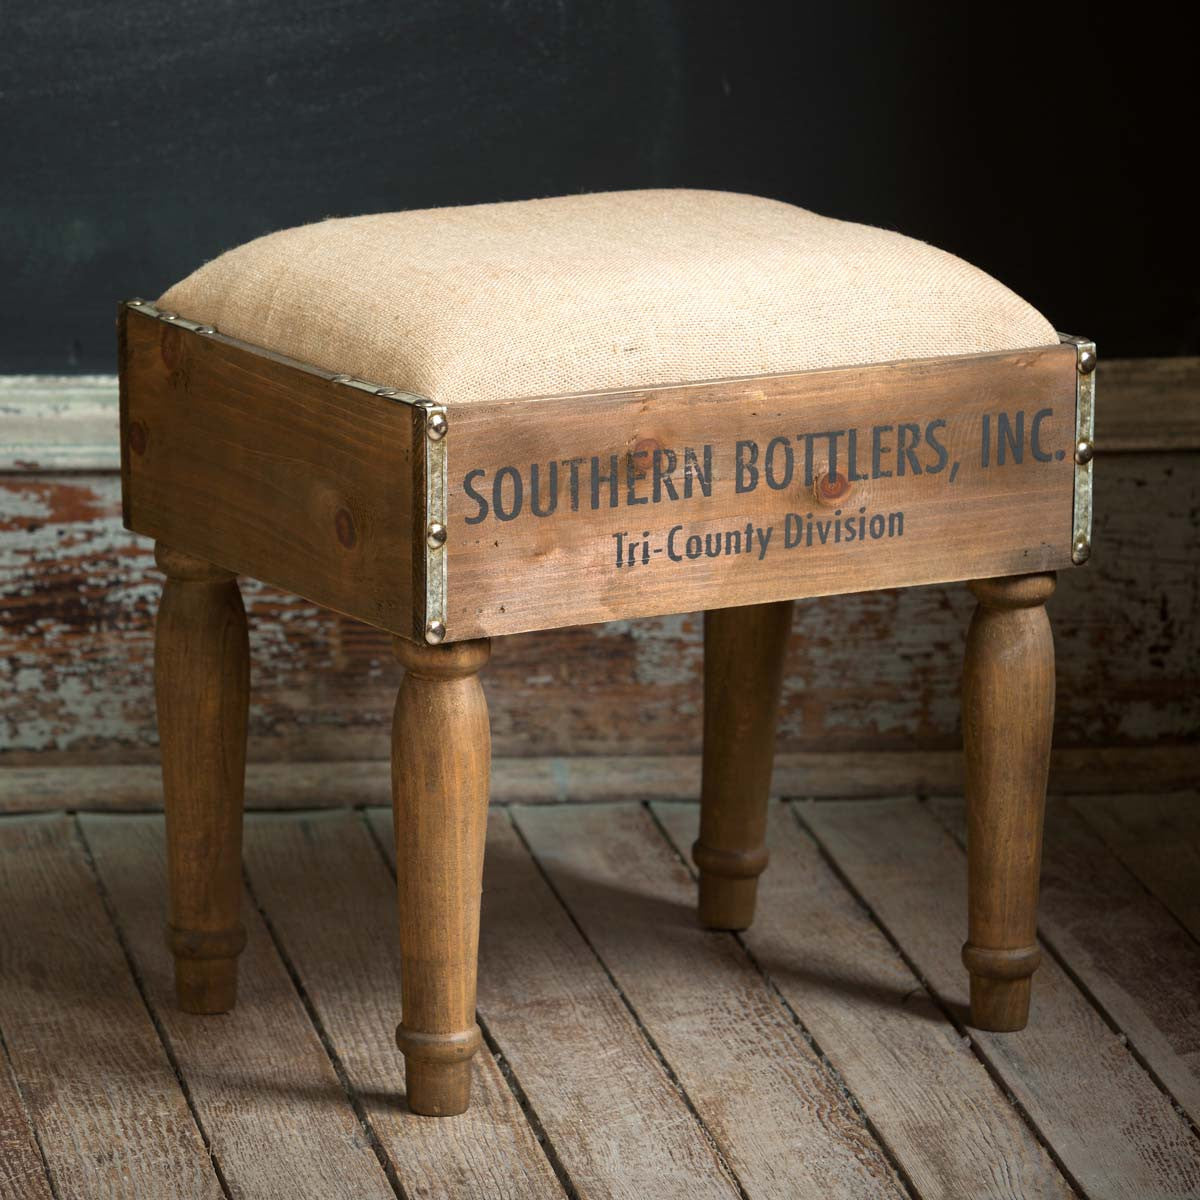 Bottle Crate Foot Stool - The Reclaimed Farmhouse